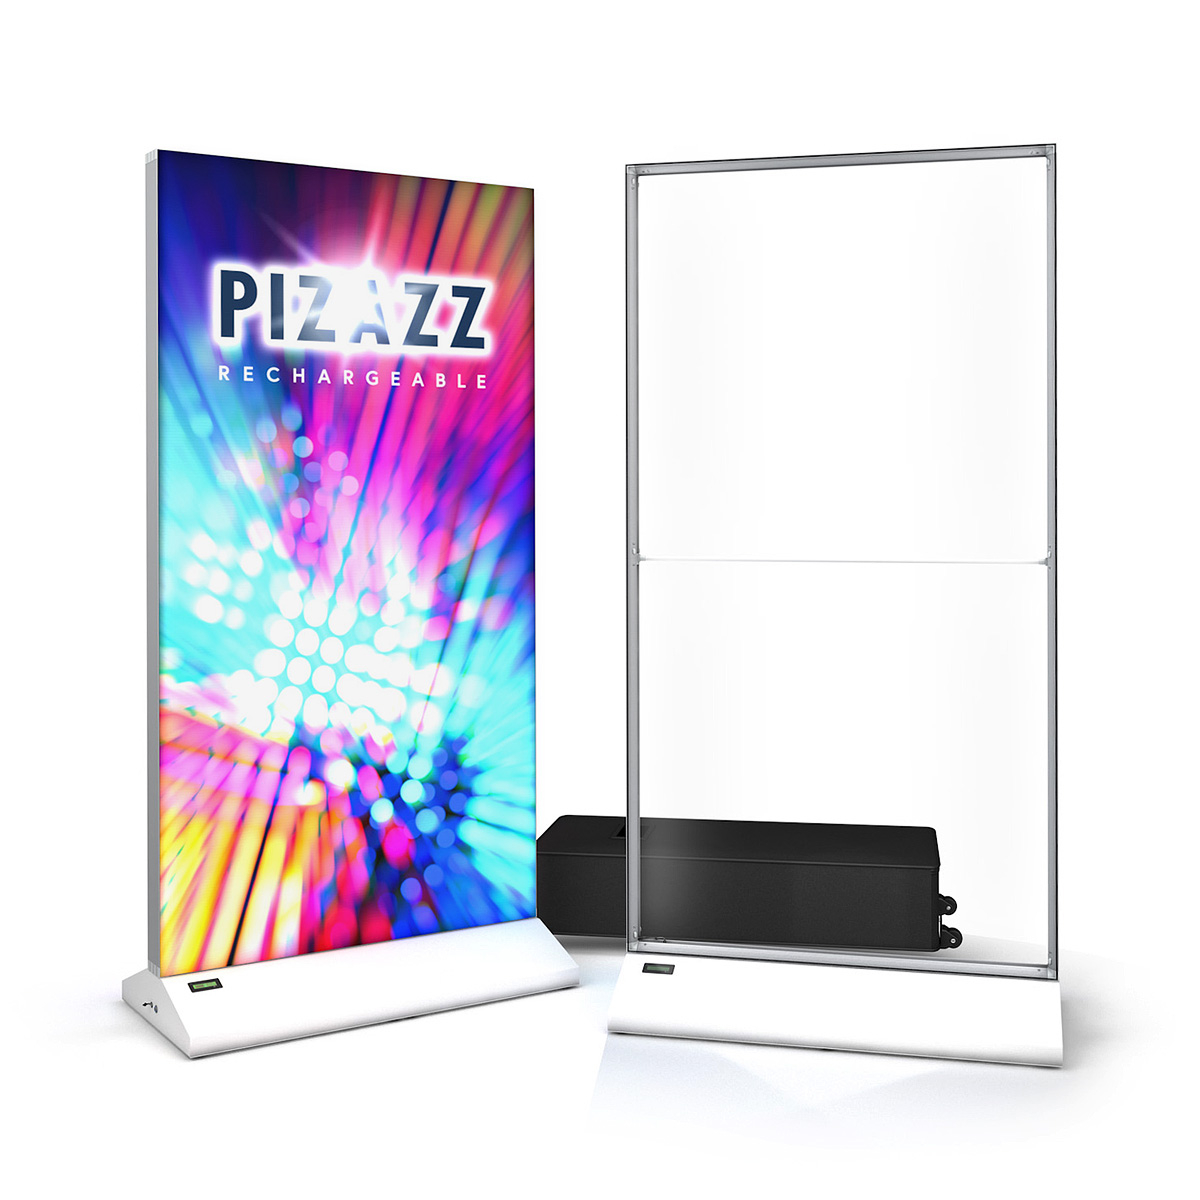 PIZAZZ® Rechargeable Battery Powered LED Lightbox Display